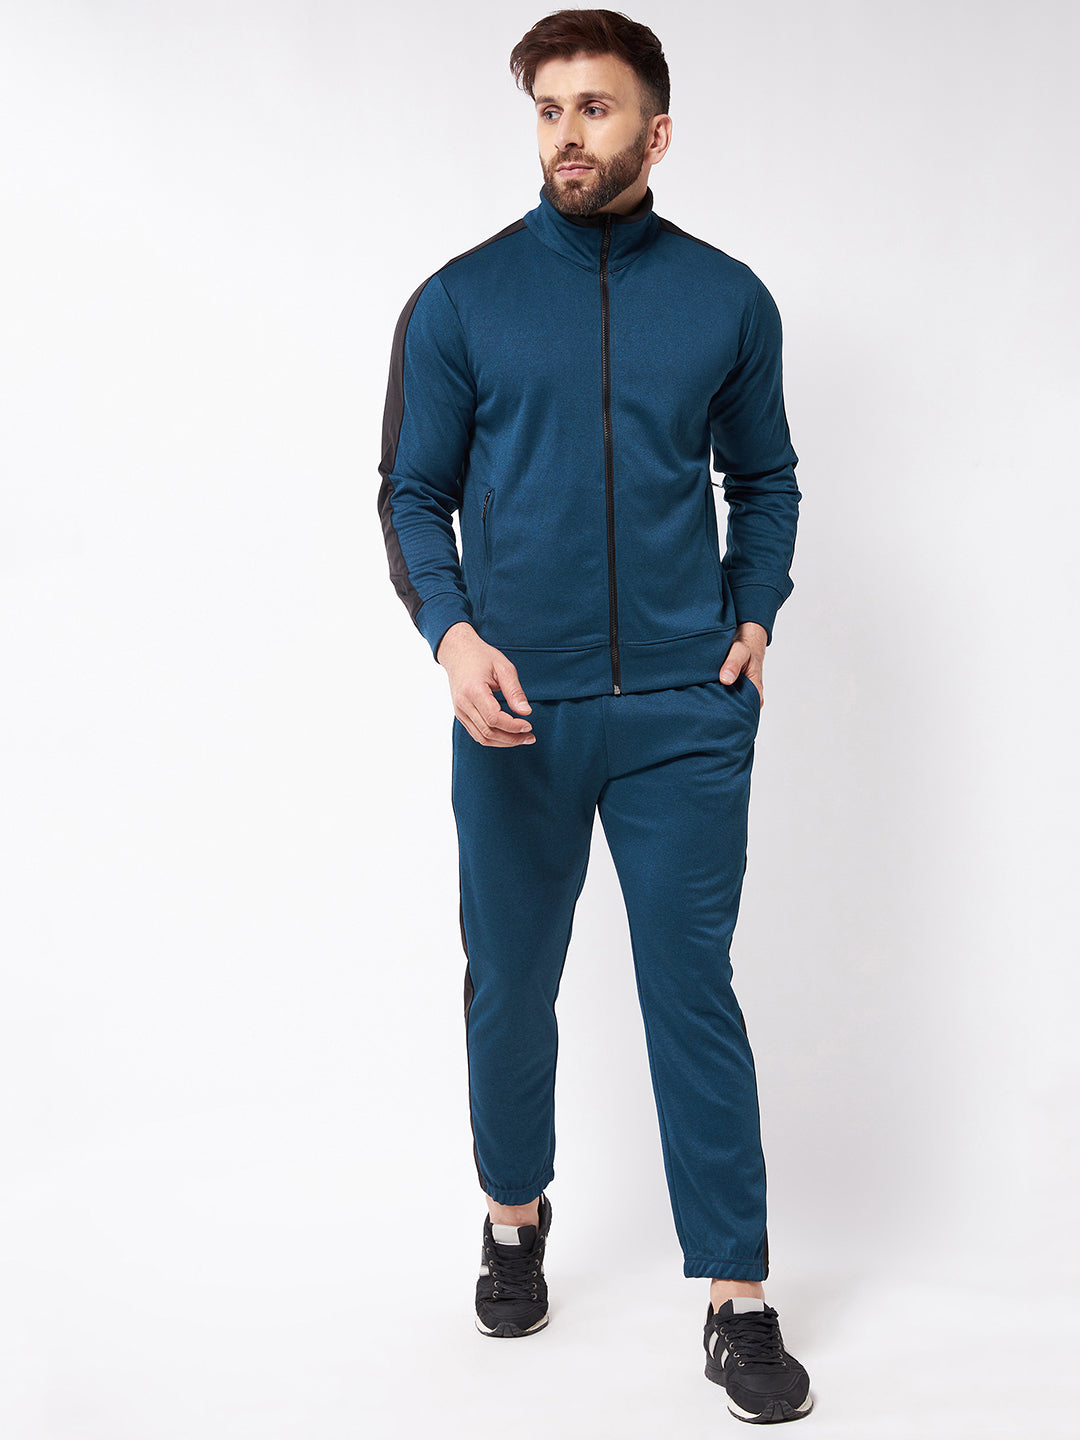 Turquoise Blue Sportswear Co-ords Track Suit